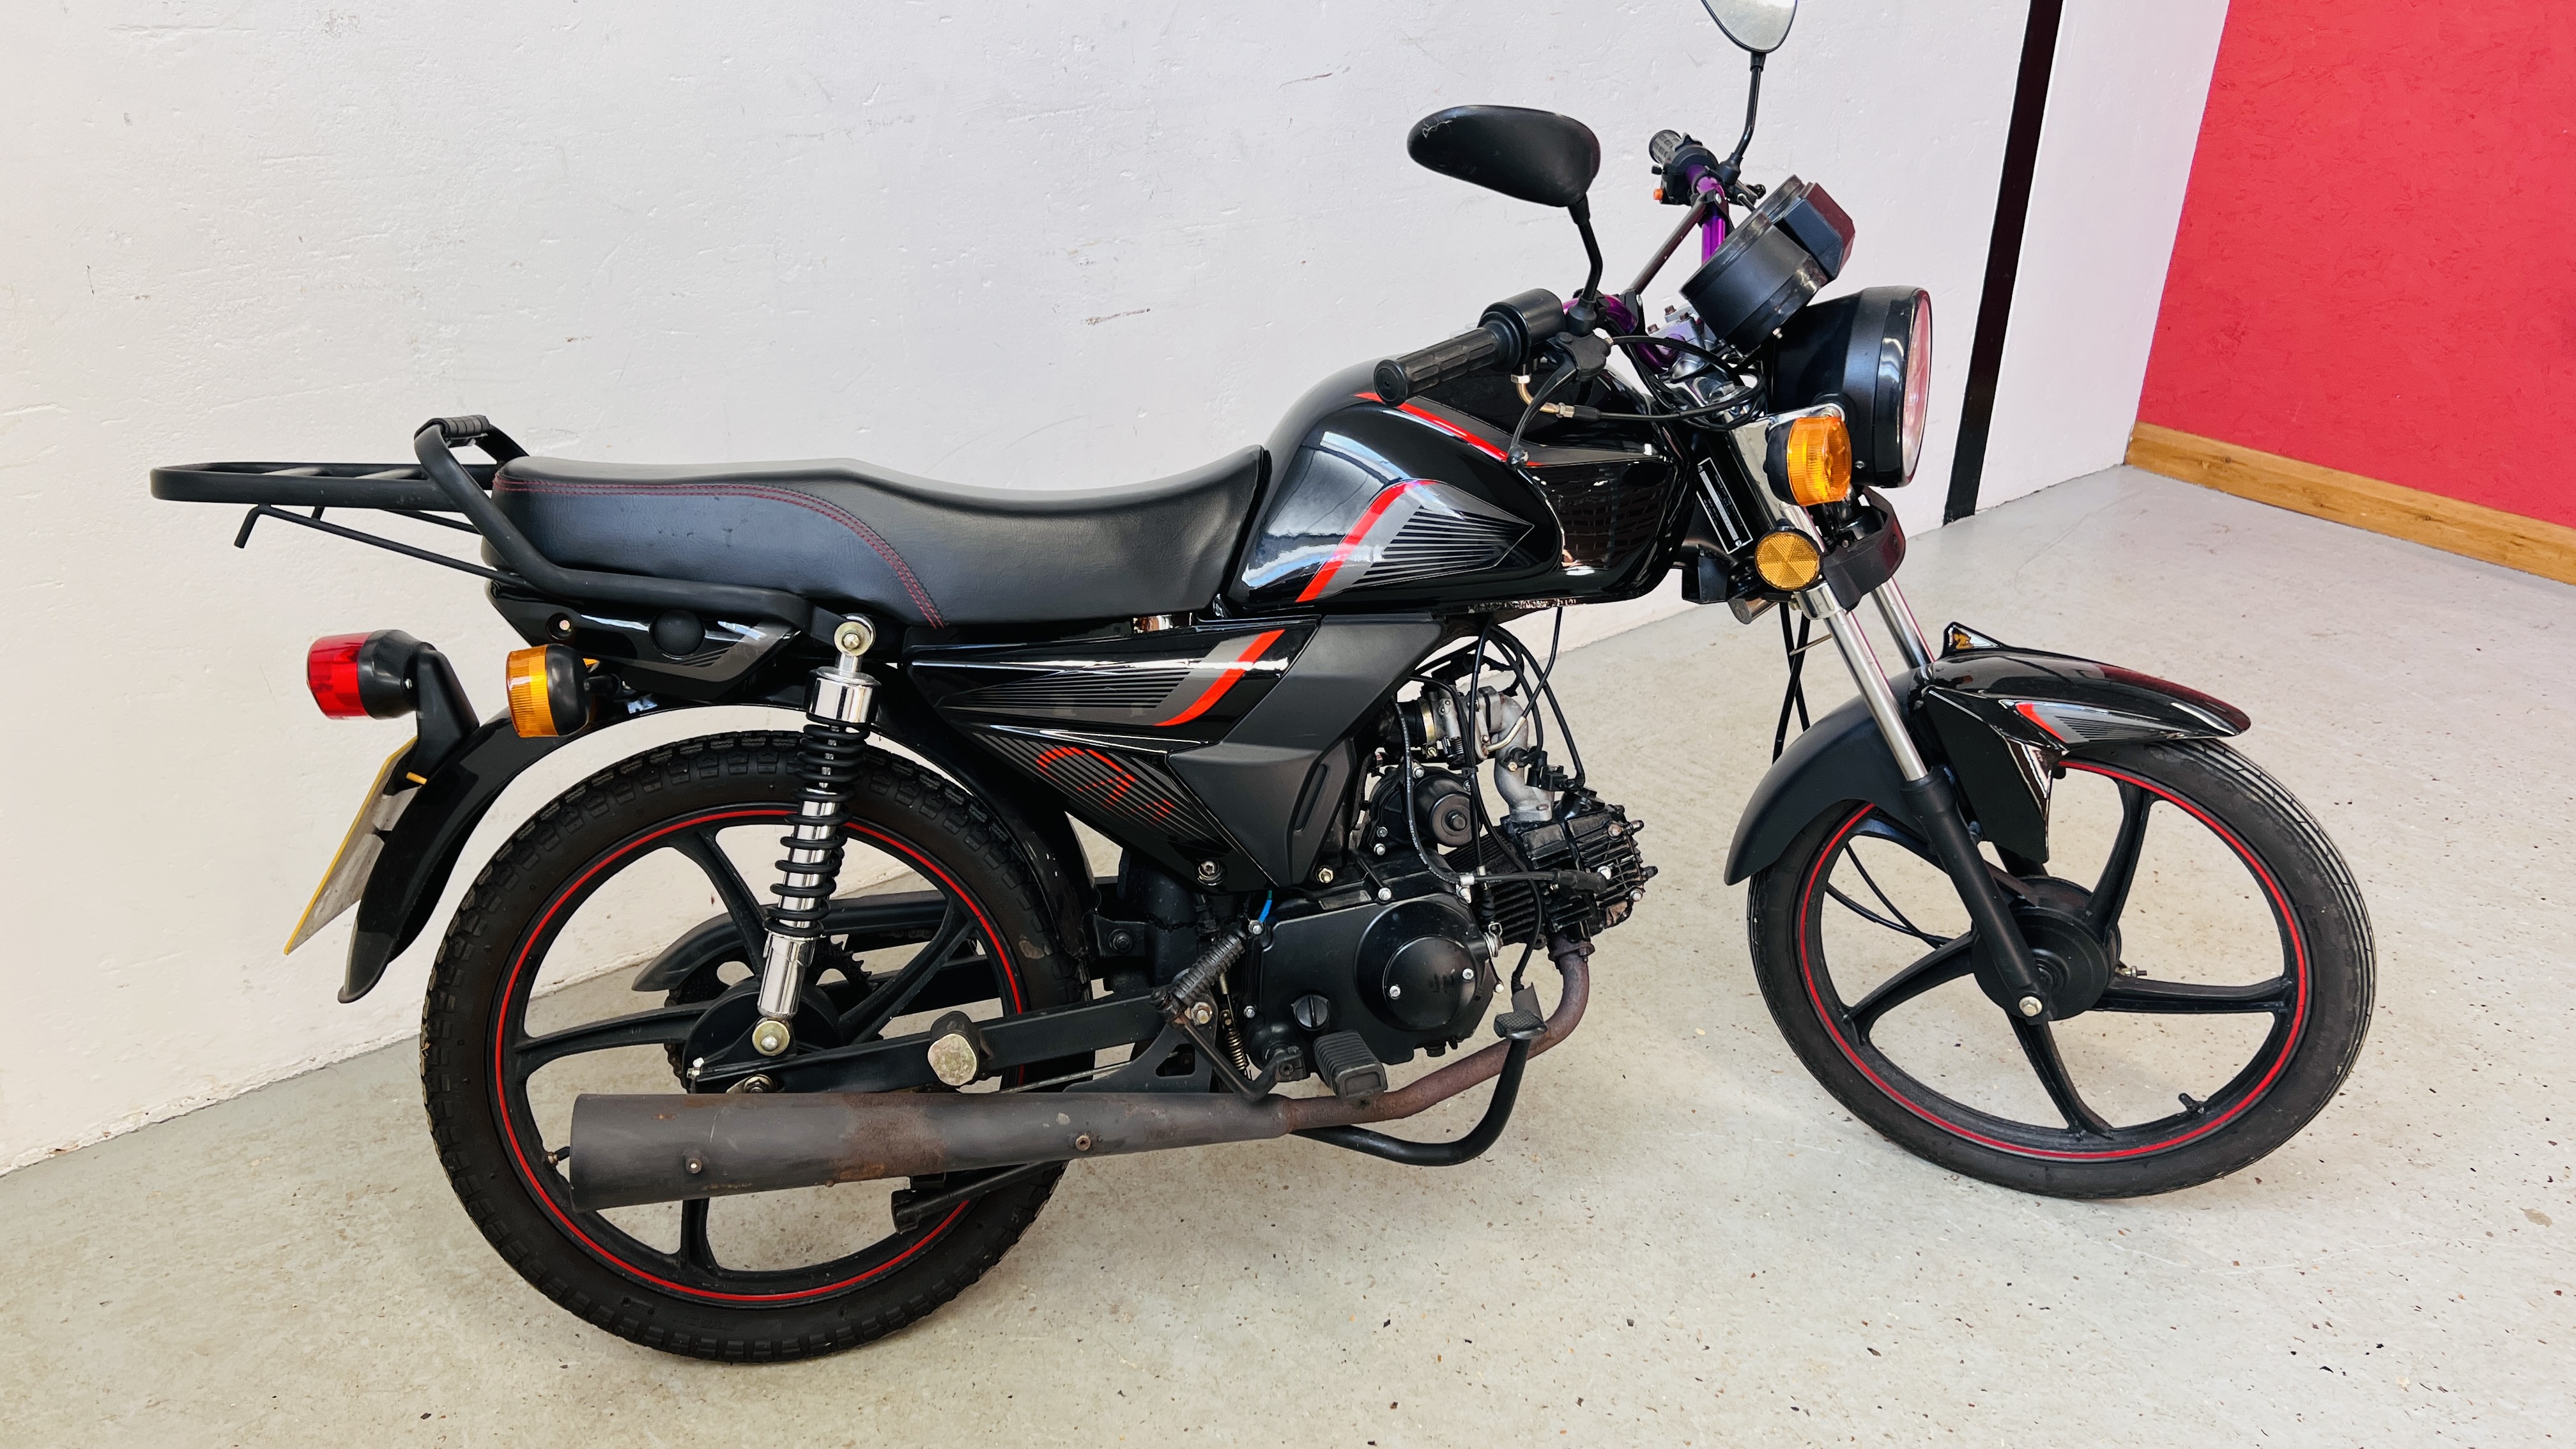 CHAMP 48CC MOTOR CYCLE. VRM - KX69 CHD. FIRST REGISTERED: 01/10/2019. MOT EXPIRED: 30/09/2022. - Image 5 of 22